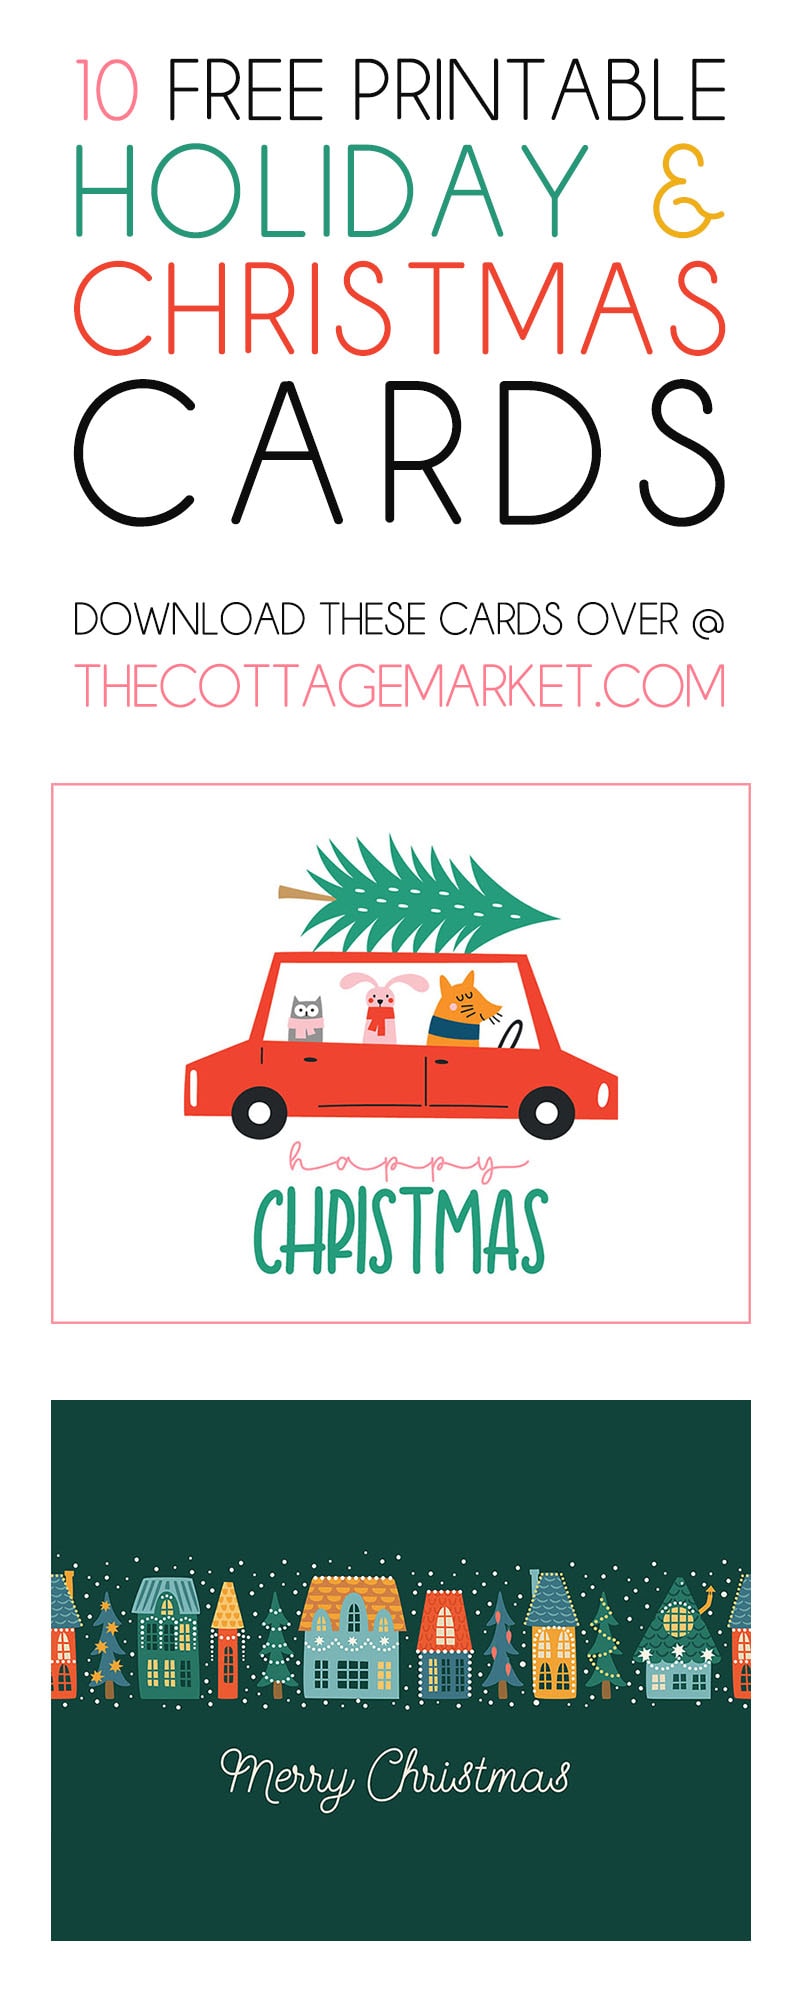 Come and enjoy this Fabulous Free Printable Holiday & Christmas Cards.  They are adorable we know you will find the perfect one! These Free Printable Christmas Cards are Too Cute!